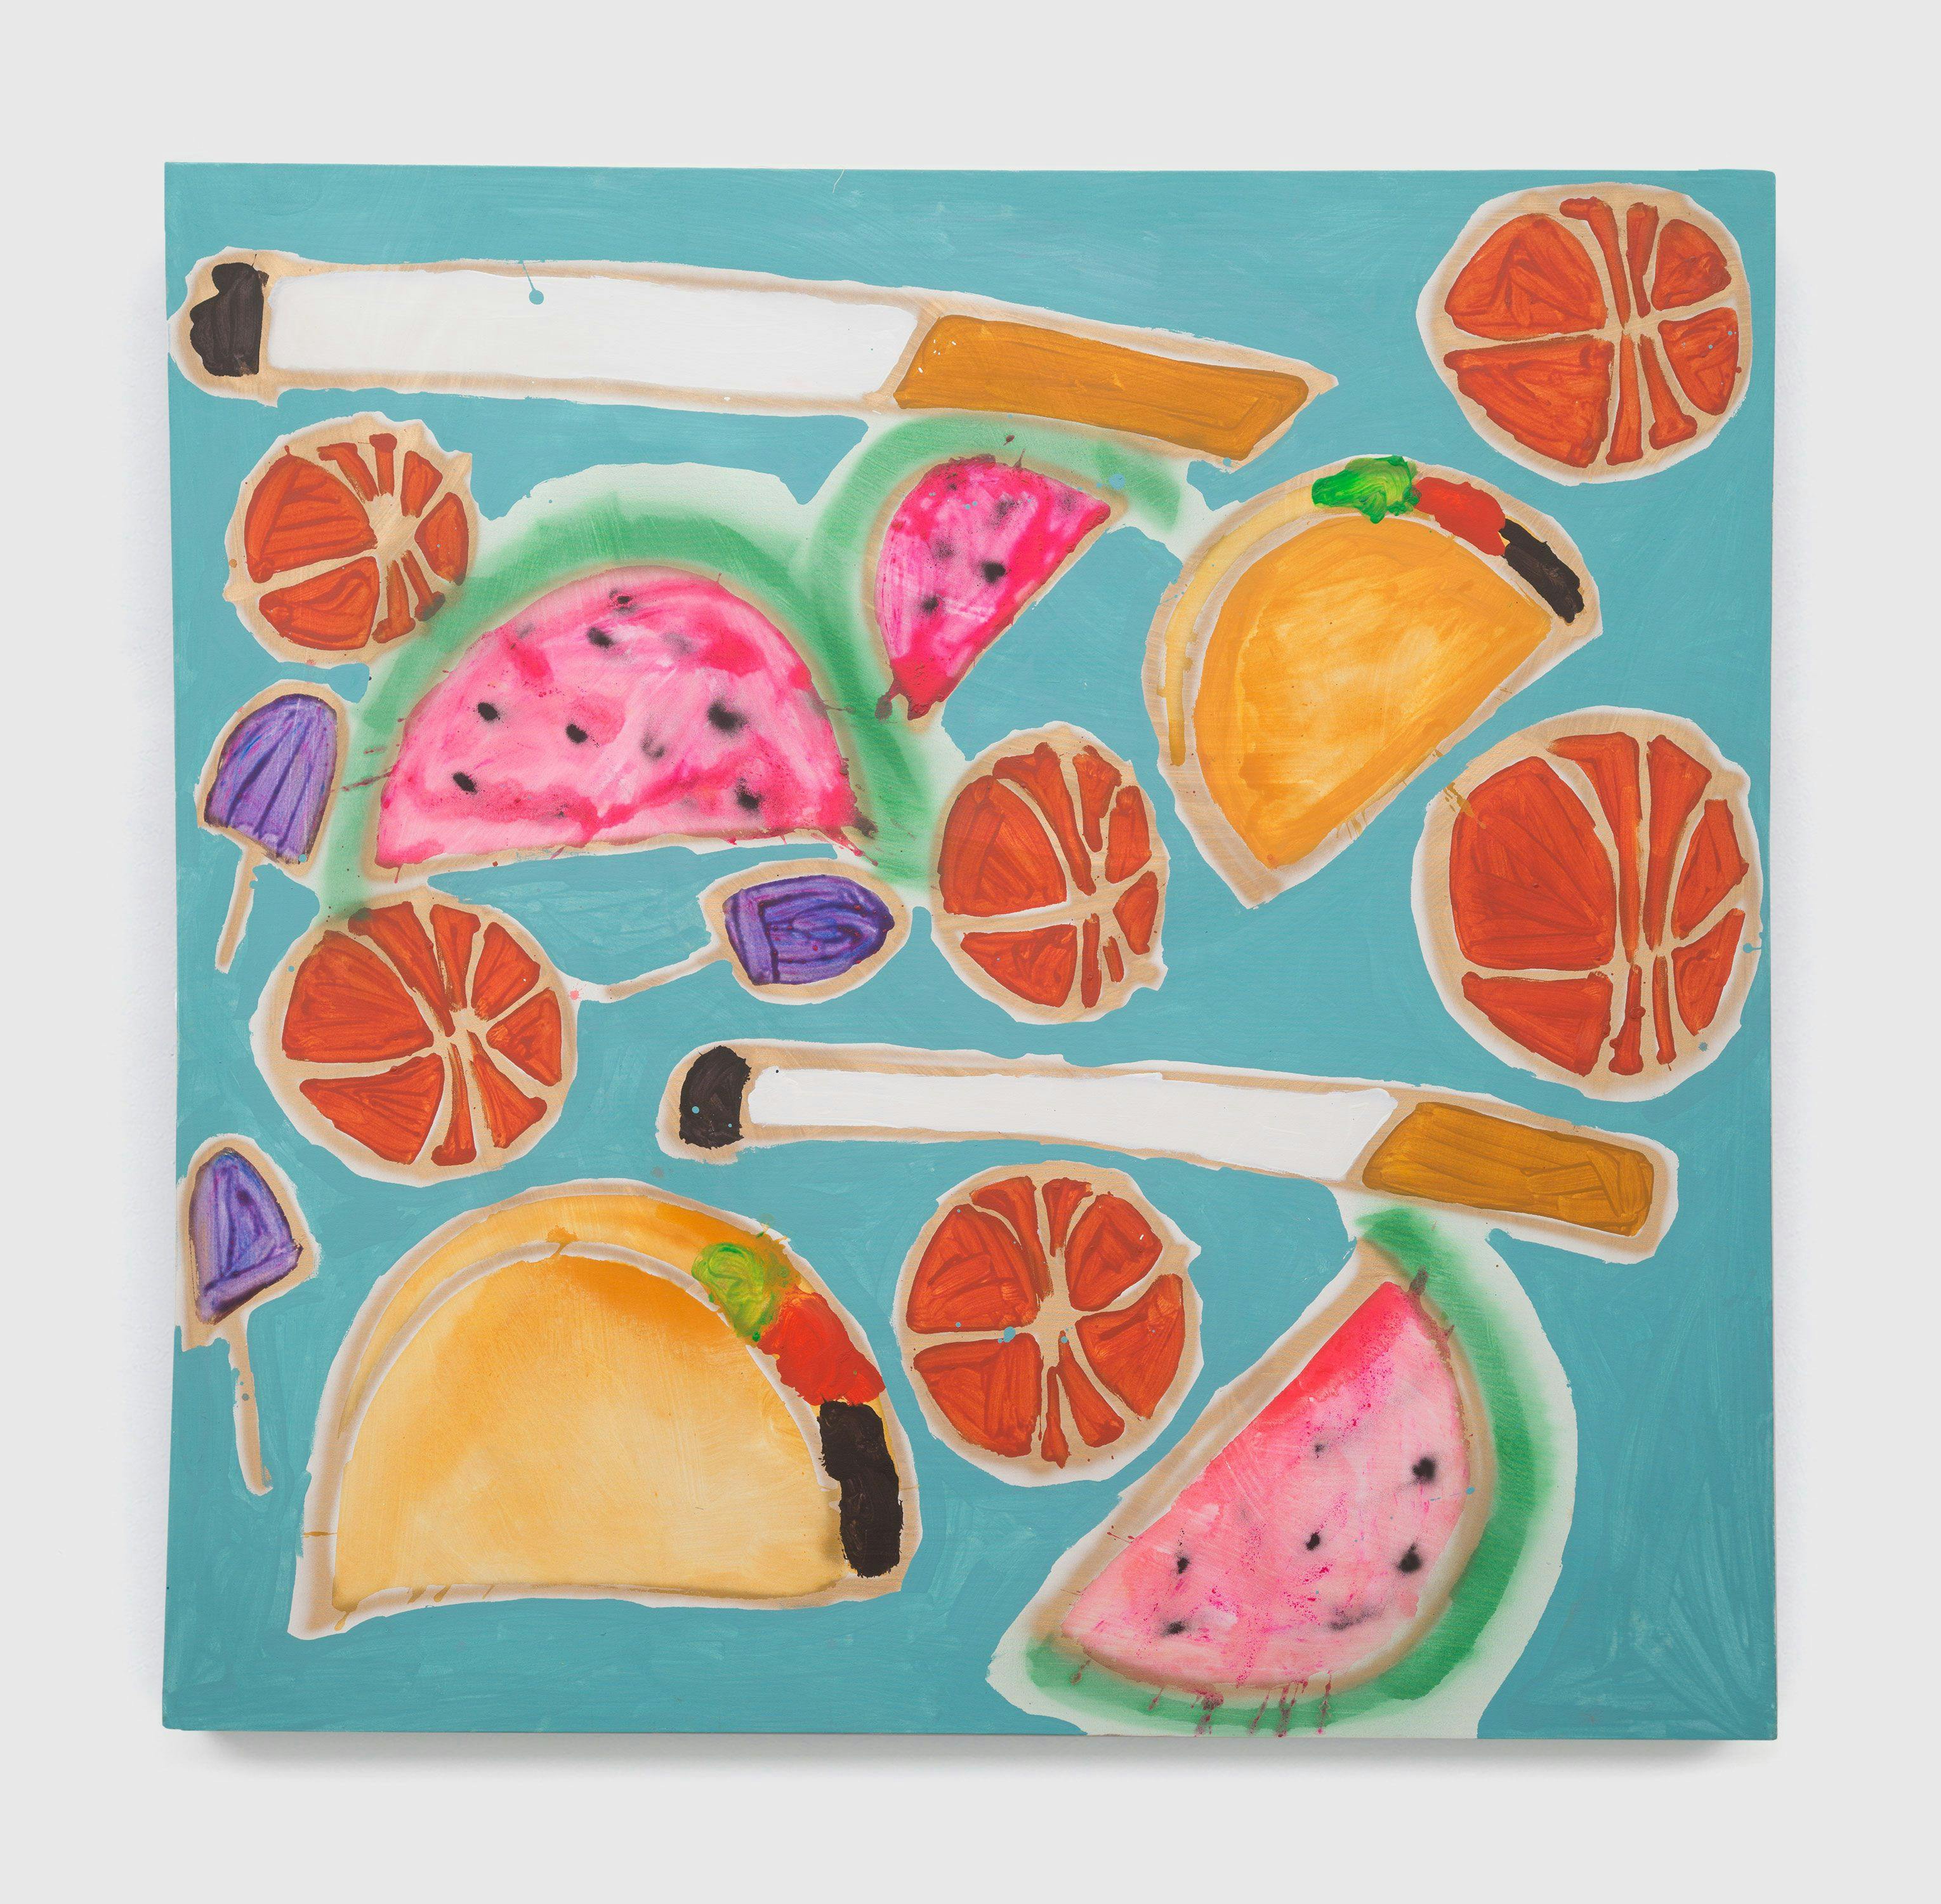 A painting by Katherine Bernhardt, titled Tropical Fruit Salad, dated 2014.